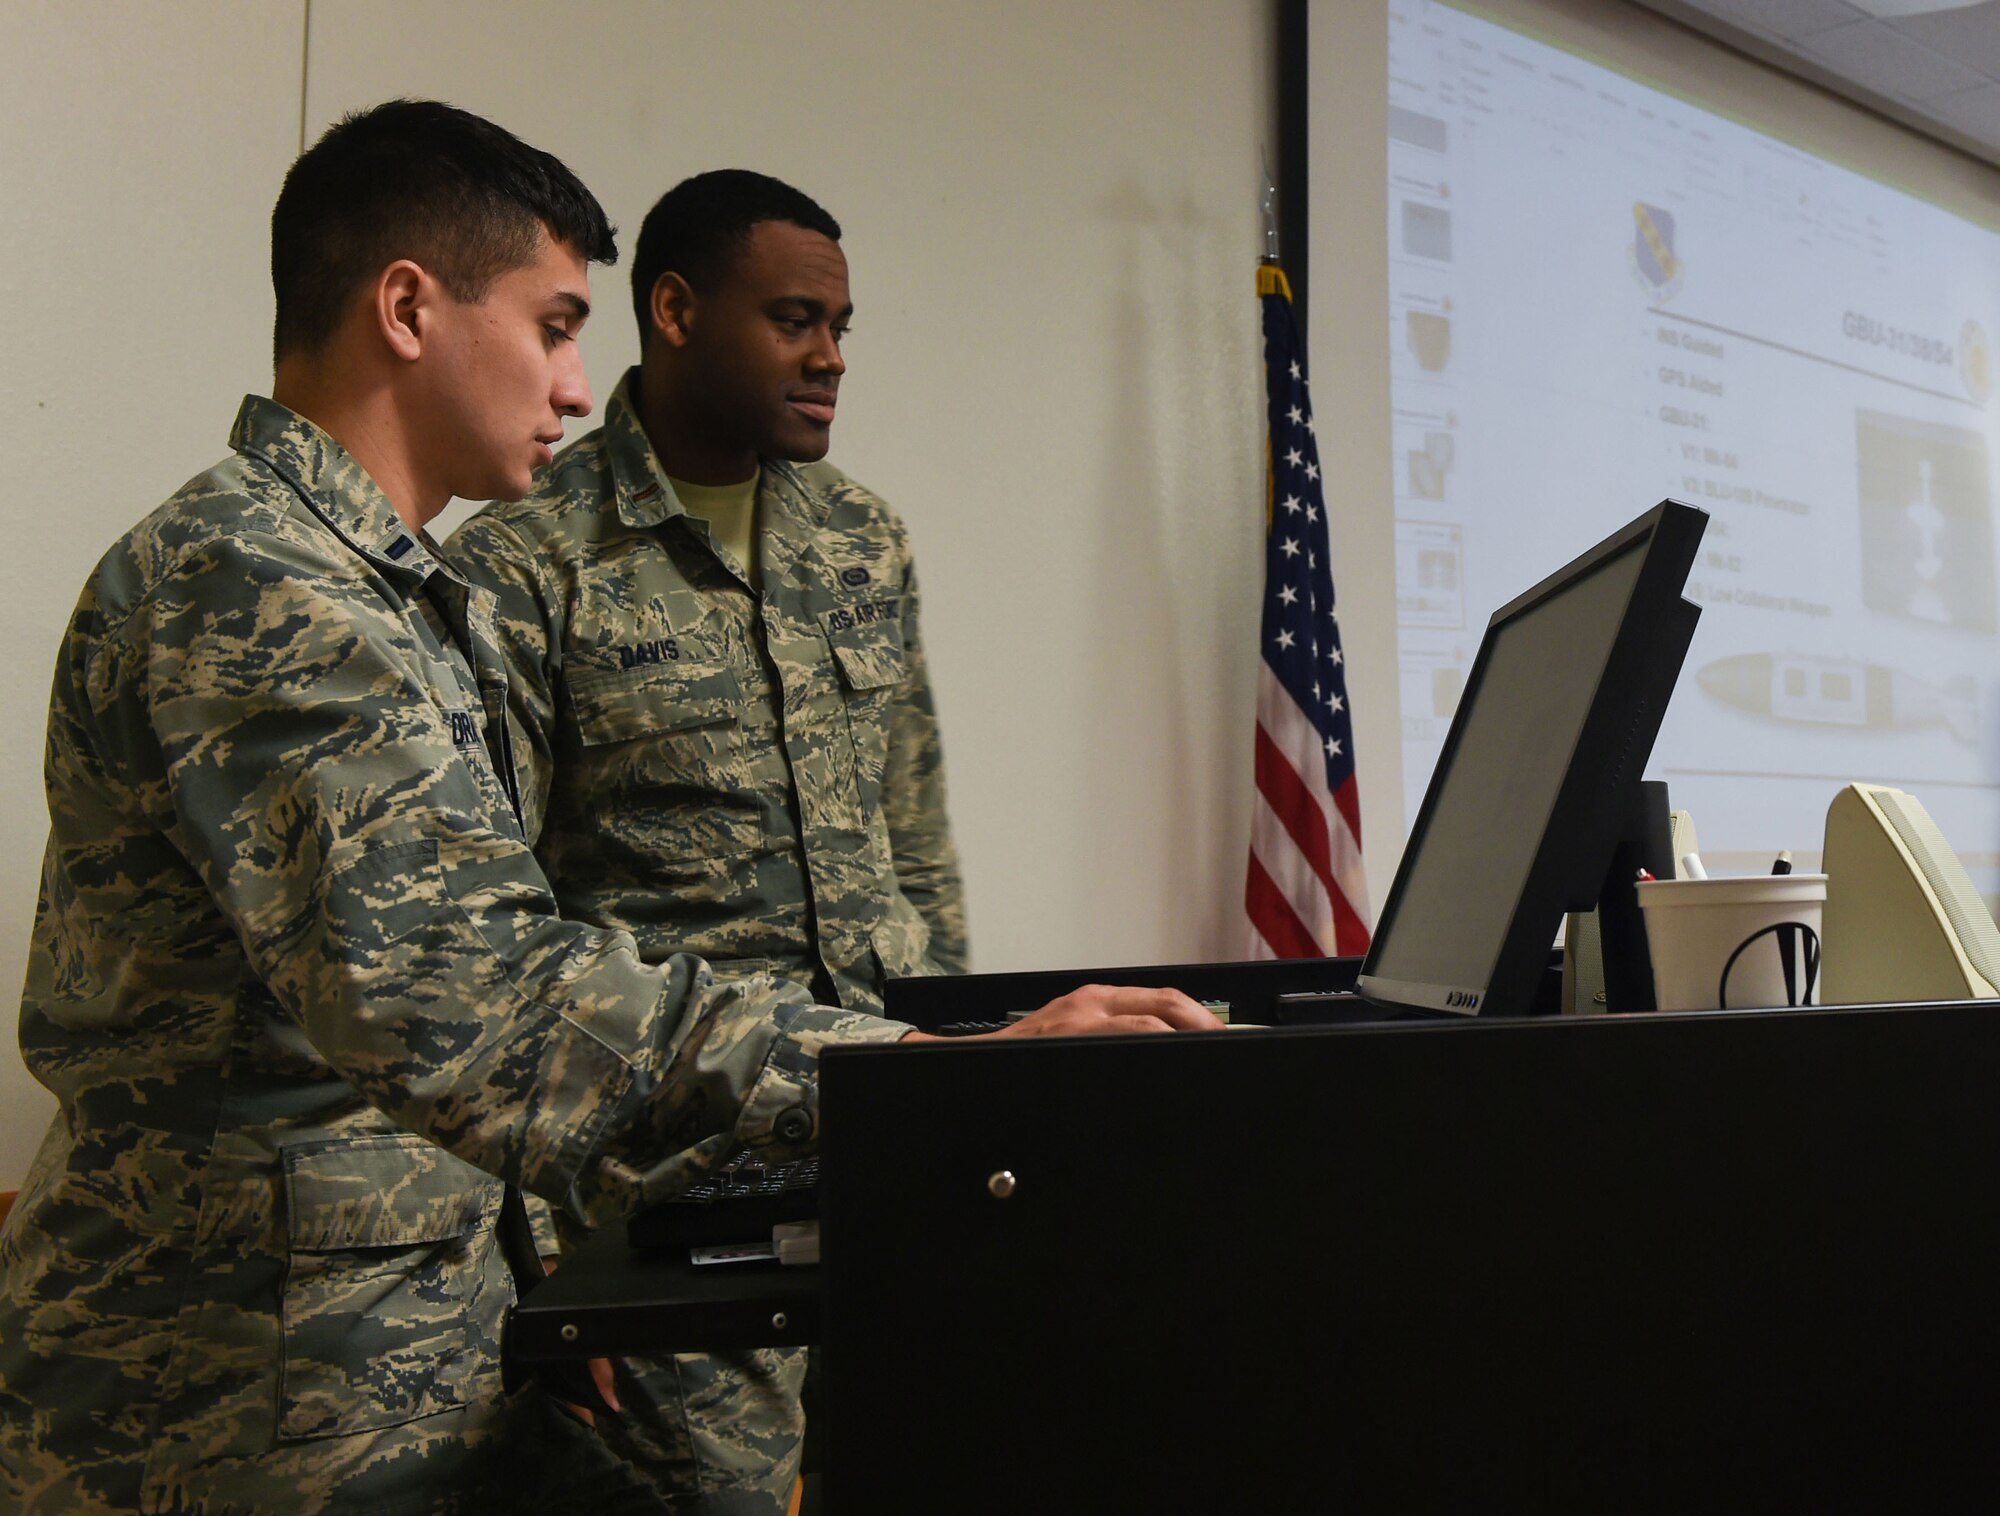 U.S. Air Force 1st Lt. Matthew Drake (left) and 2nd Lt. Myles Davis, 7th Operations Support Squadron intelligence officers, review slides with information on the B-1B Lancer at Dyess Air Force Base, Texas, Jan. 25, 2017. During the final stages of mission qualification, Drake and Davis work with a team of pilots, weapon system operators and other intelligence professionals to create a mission plan as part of their capstone.  Intel Airmen analyze information, coordinate with other units and are expected to know not only the vulnerabilities of an enemy, but also their proficiencies and potential threats to national security. (U.S. Air Force photo by Airman 1st Class Quay Drawdy)